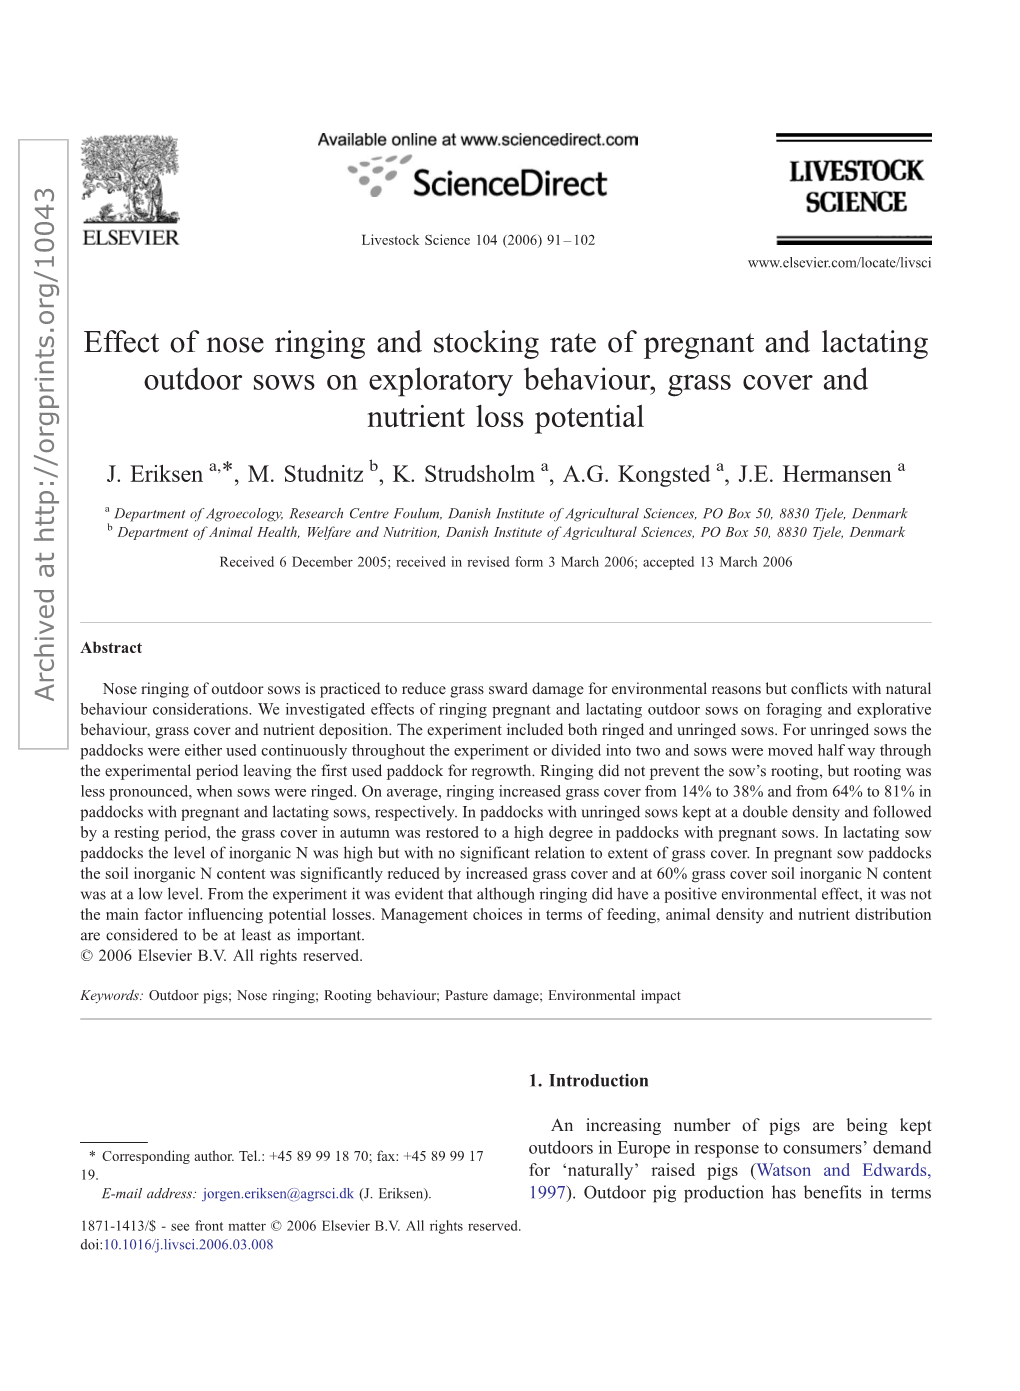 Effect of Nose Ringing and Stocking Rate of Pregnant and Lactating Outdoor Sows on Exploratory Behaviour, Grass Cover and Nutrient Loss Potential